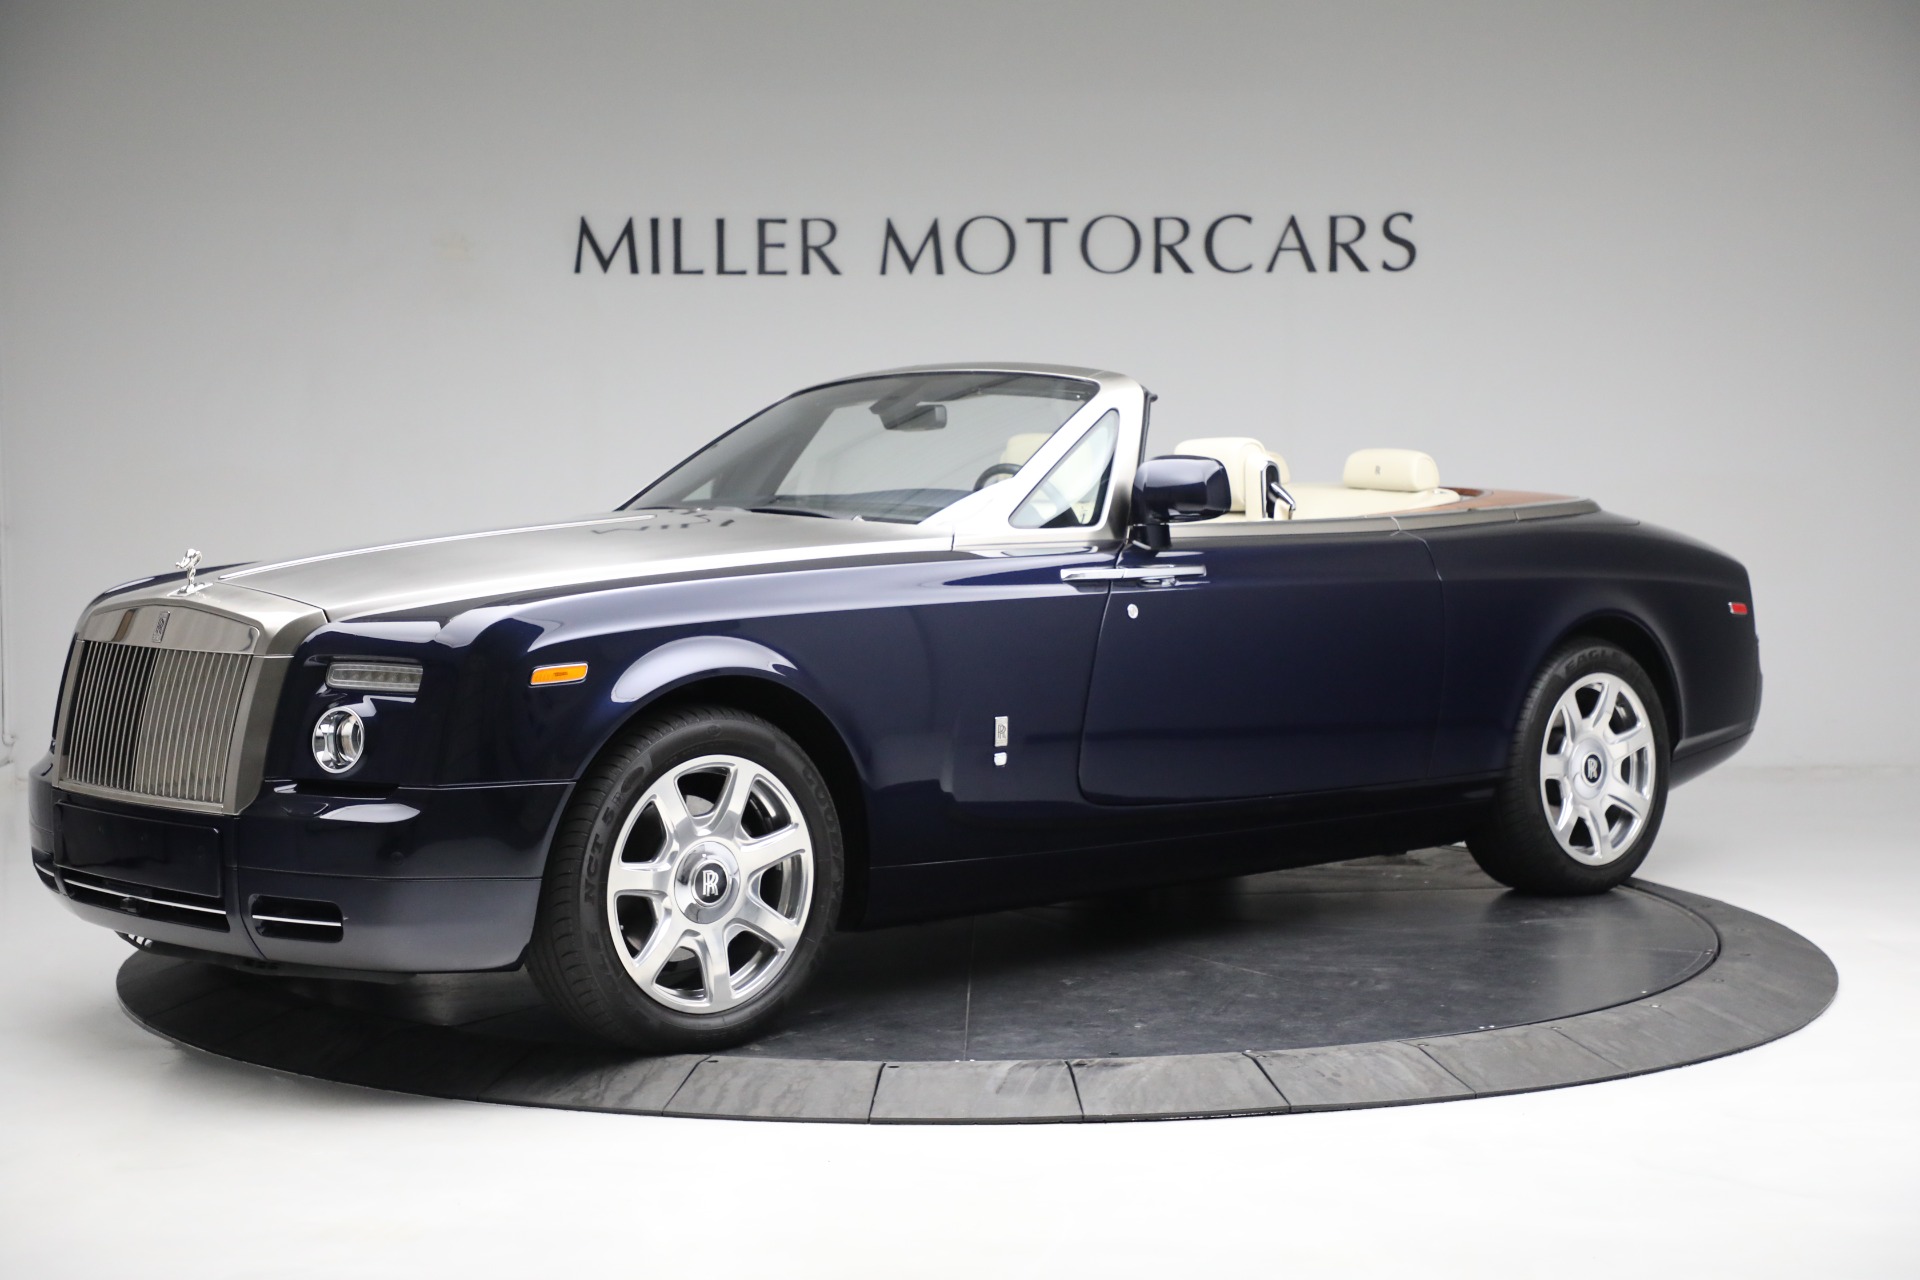 Used 2011 Rolls-Royce Phantom Drophead Coupe for sale Sold at Alfa Romeo of Greenwich in Greenwich CT 06830 1